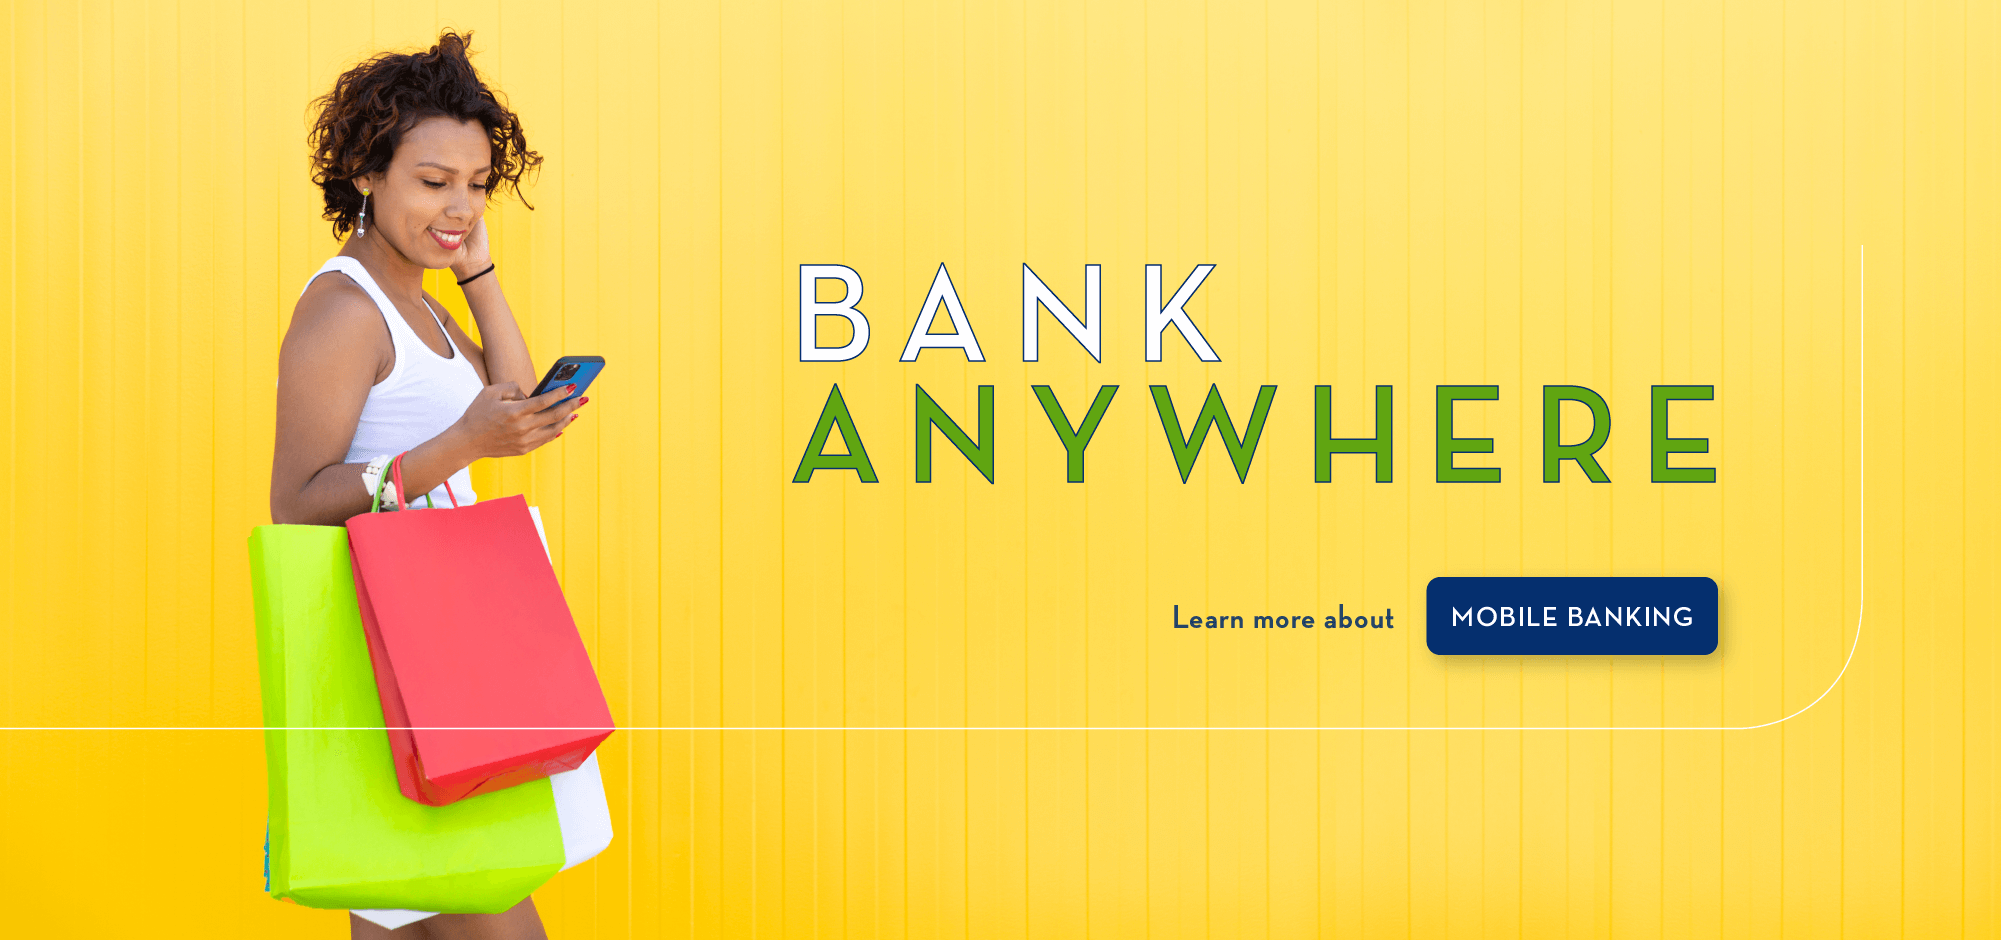 Bank Anywhere! Learn about mobile banking